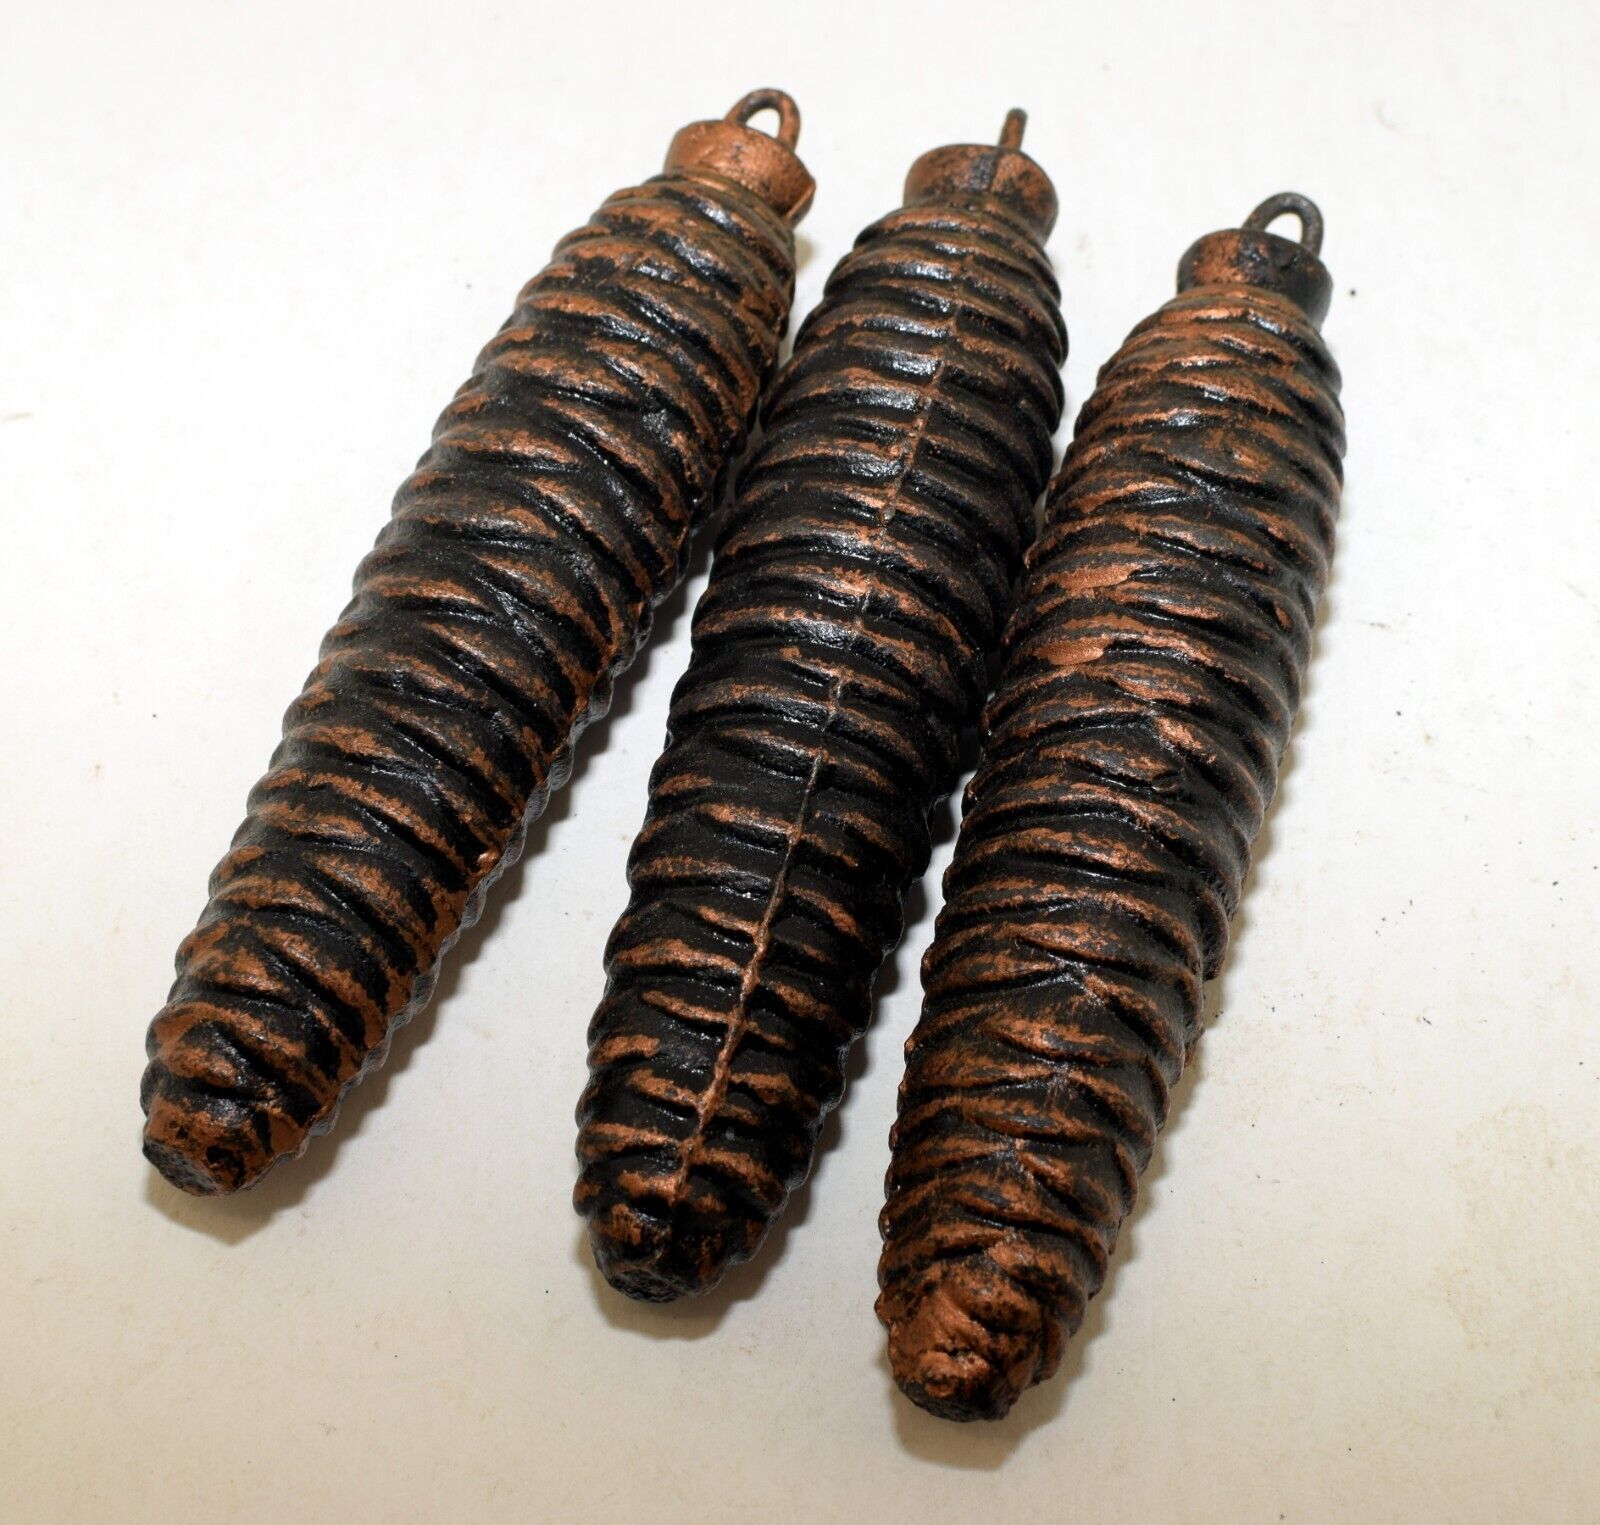 Lot of 3 Vintage Cast Iron Pine Cone Cuckoo Clock Weights 